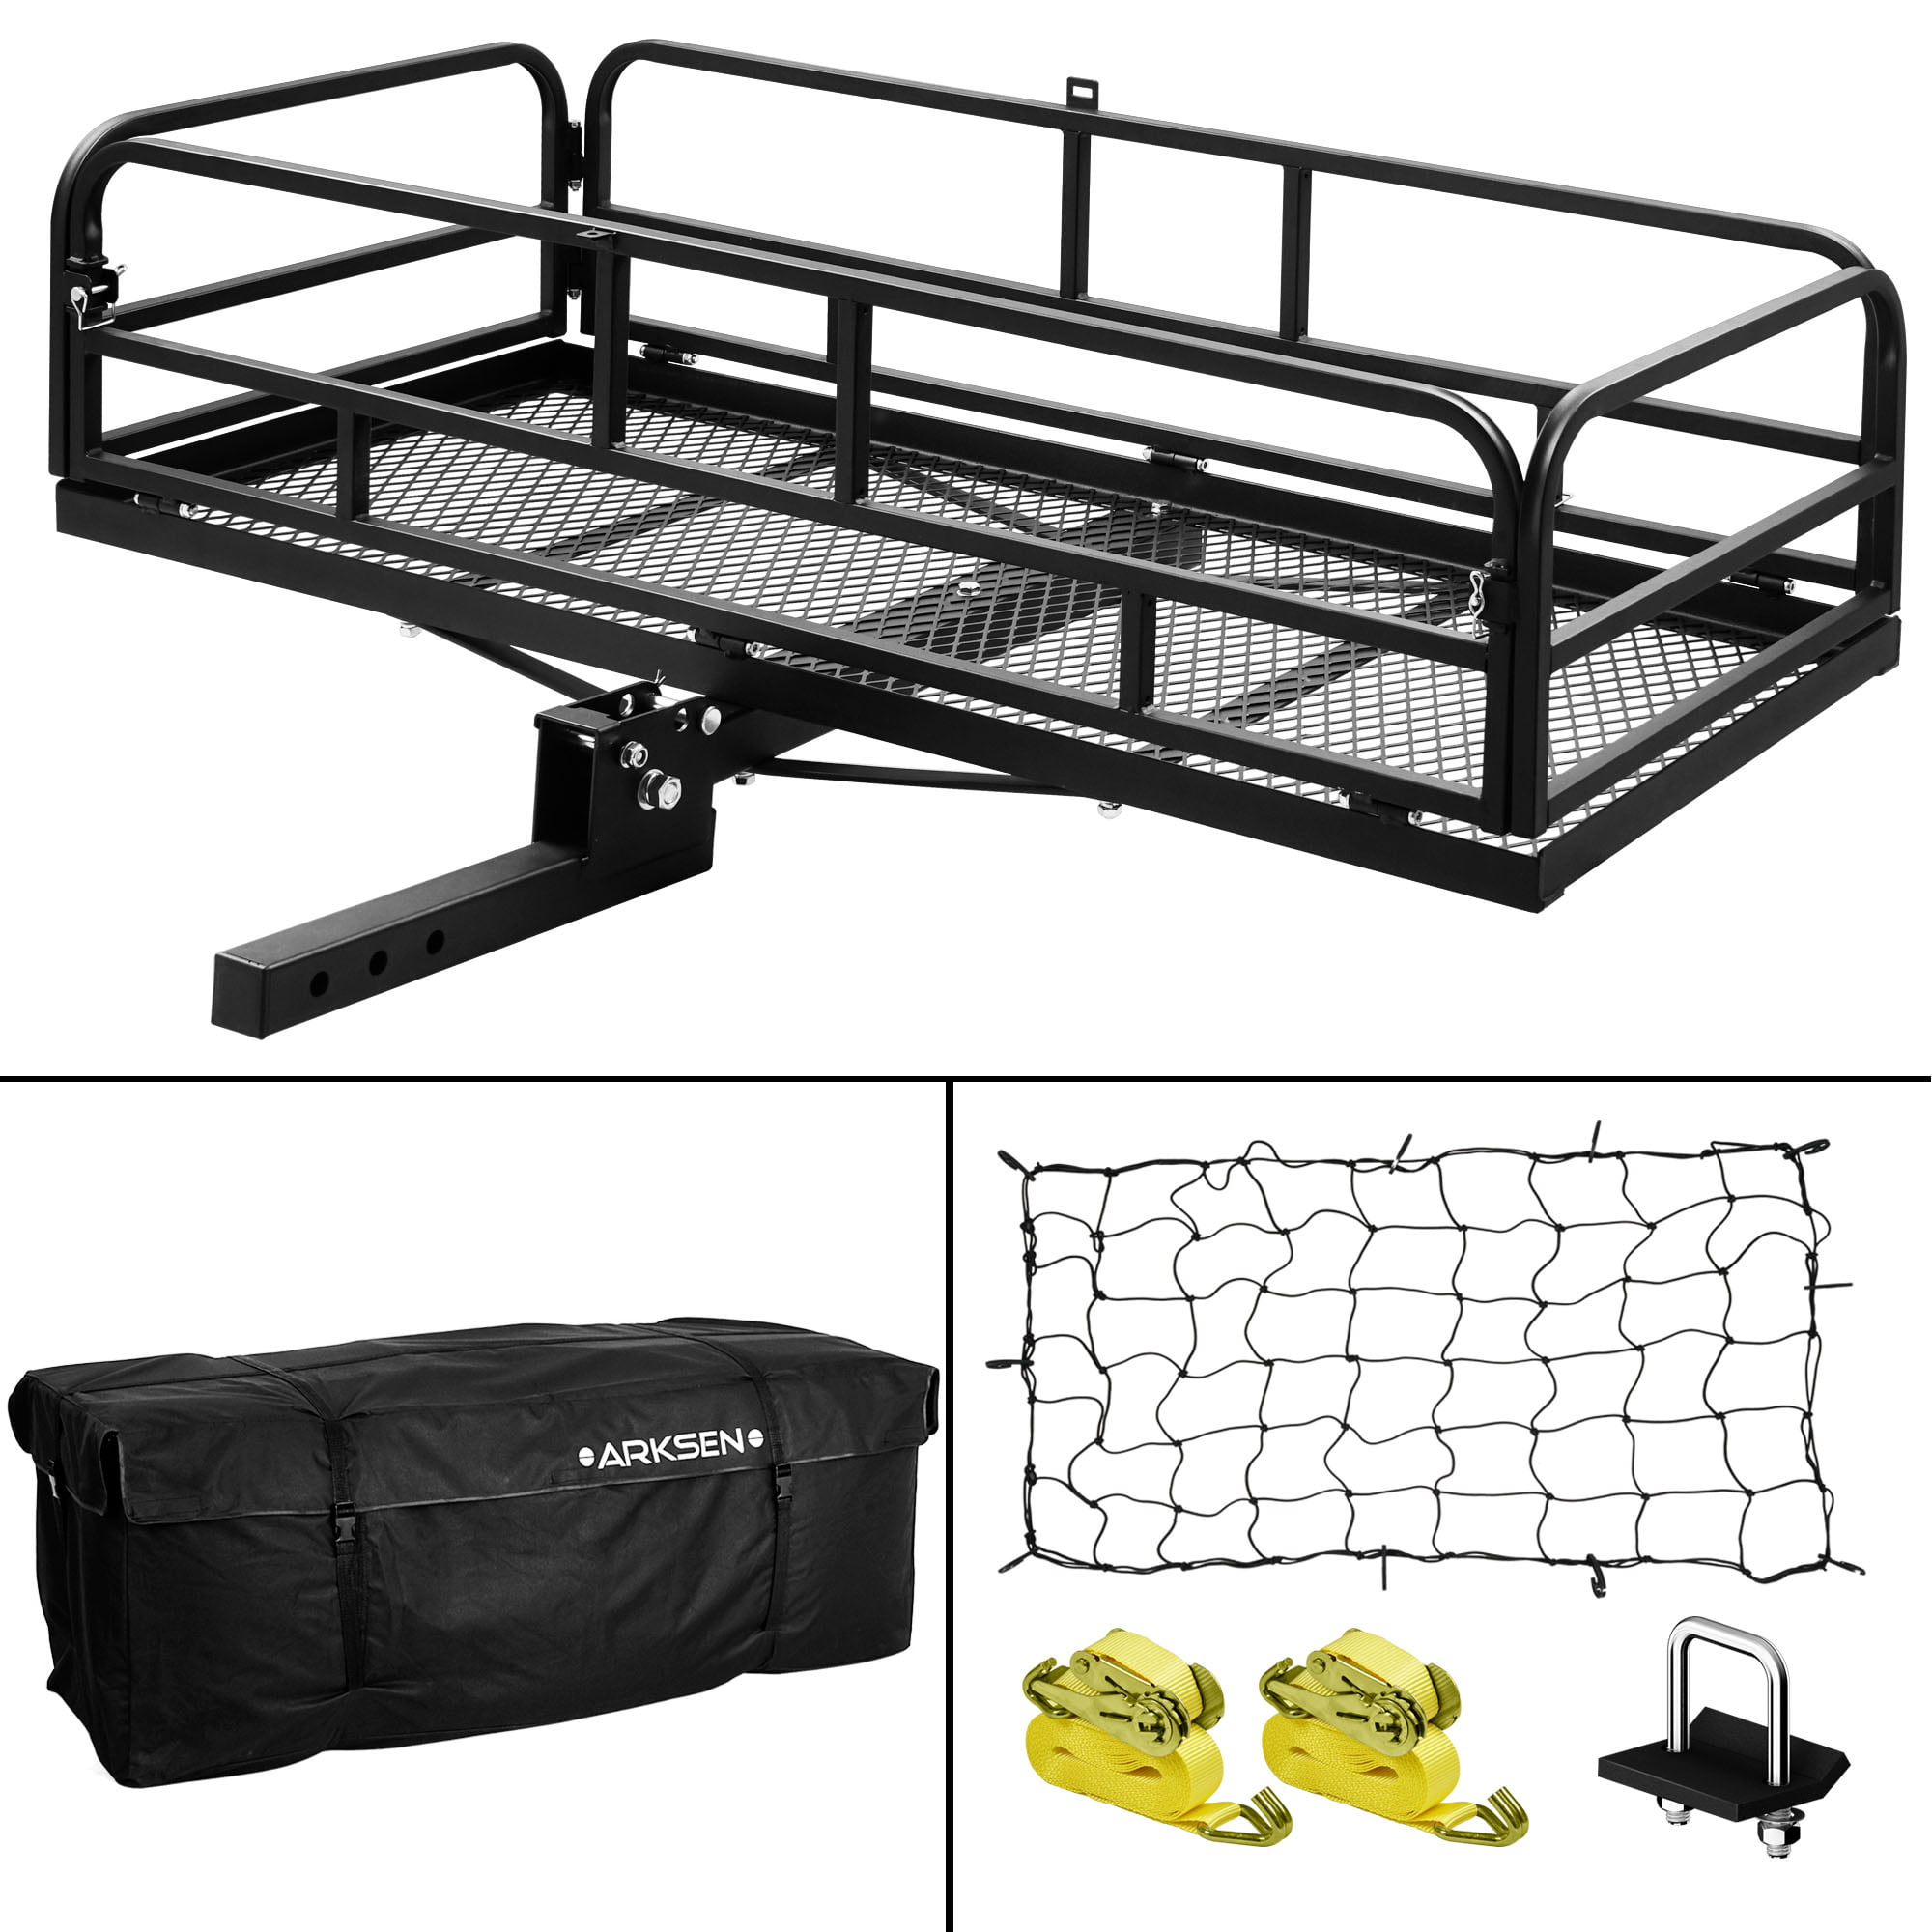 ARKSEN Foldable 60x 24x 14 Luggage Basket With Cargo Net Trailer Hitch Carrier Fit 2 Receiver,360 lbs Capacity 